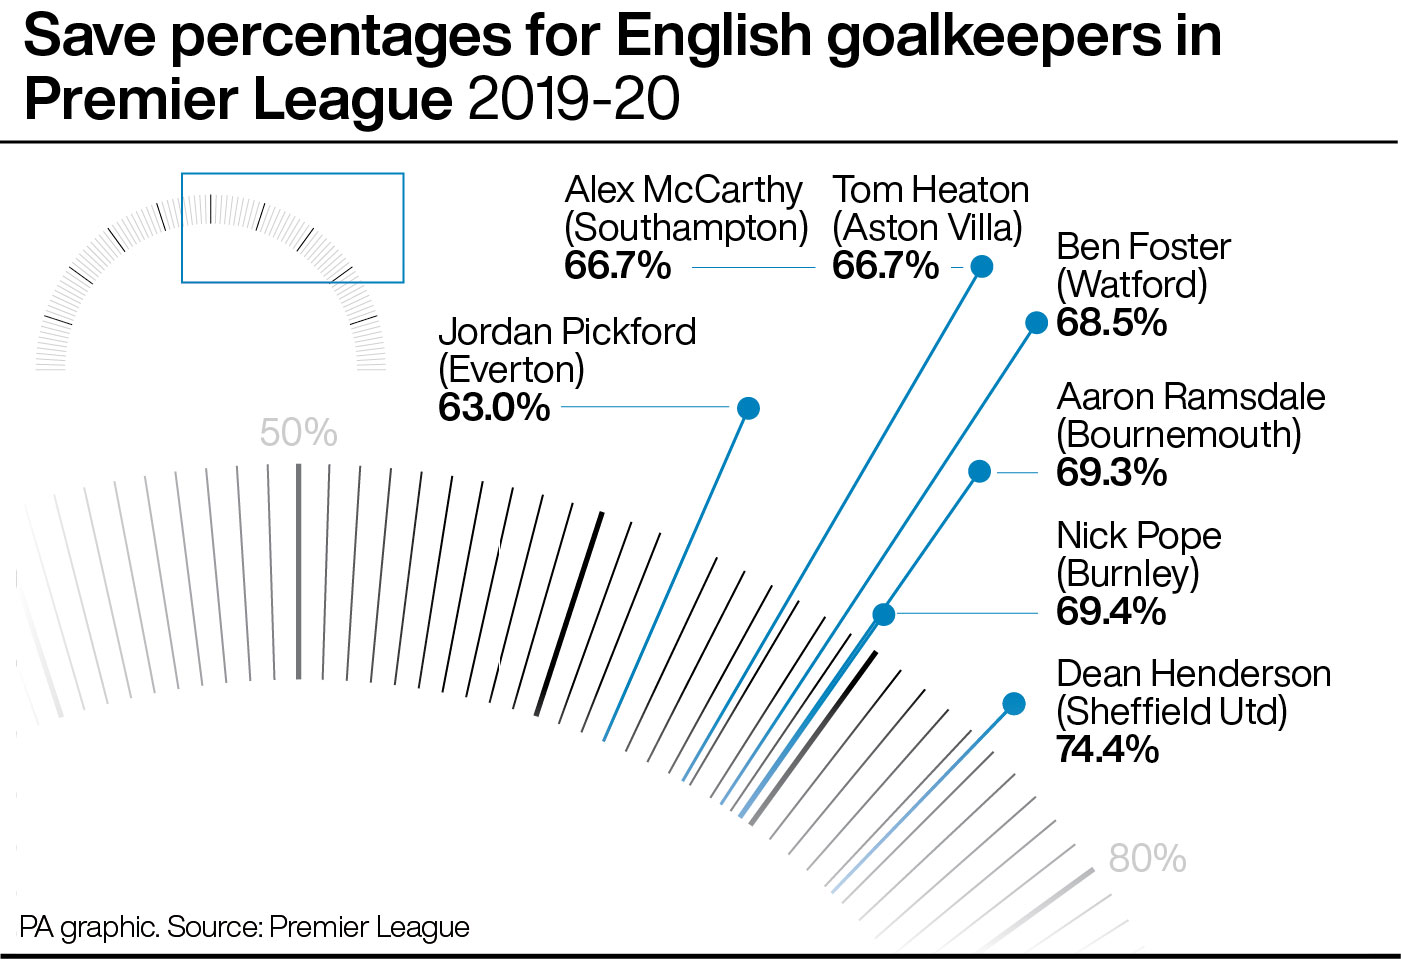 Save percentages for English goalkeepers in Premier League 2019-20